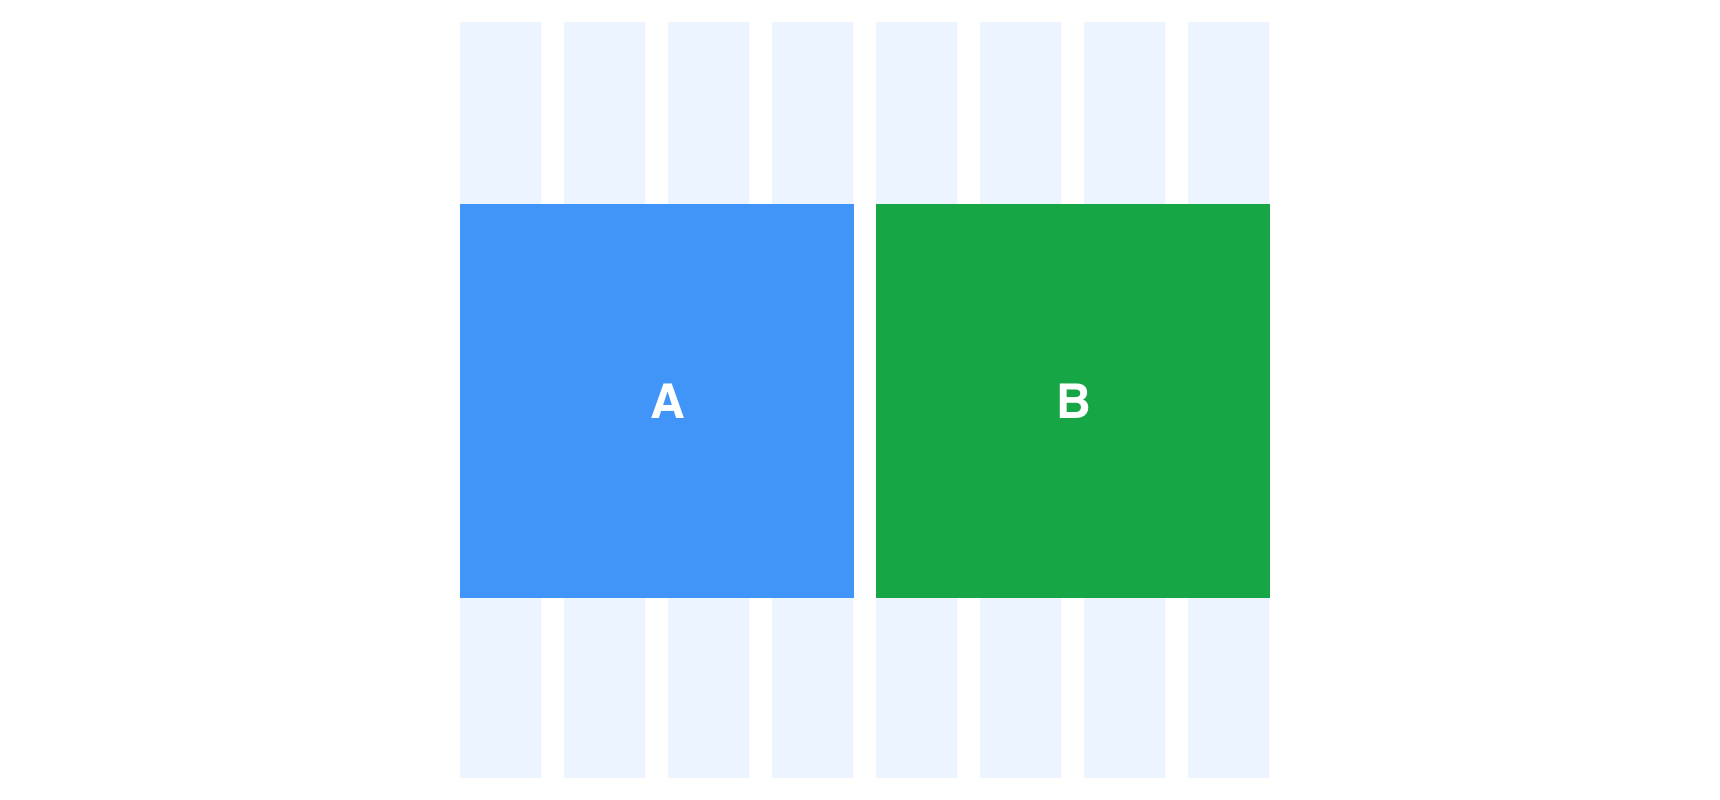 Two blocks (A,B) spanning 4 columns each, stacked side-by-side, on an 8 column grid.